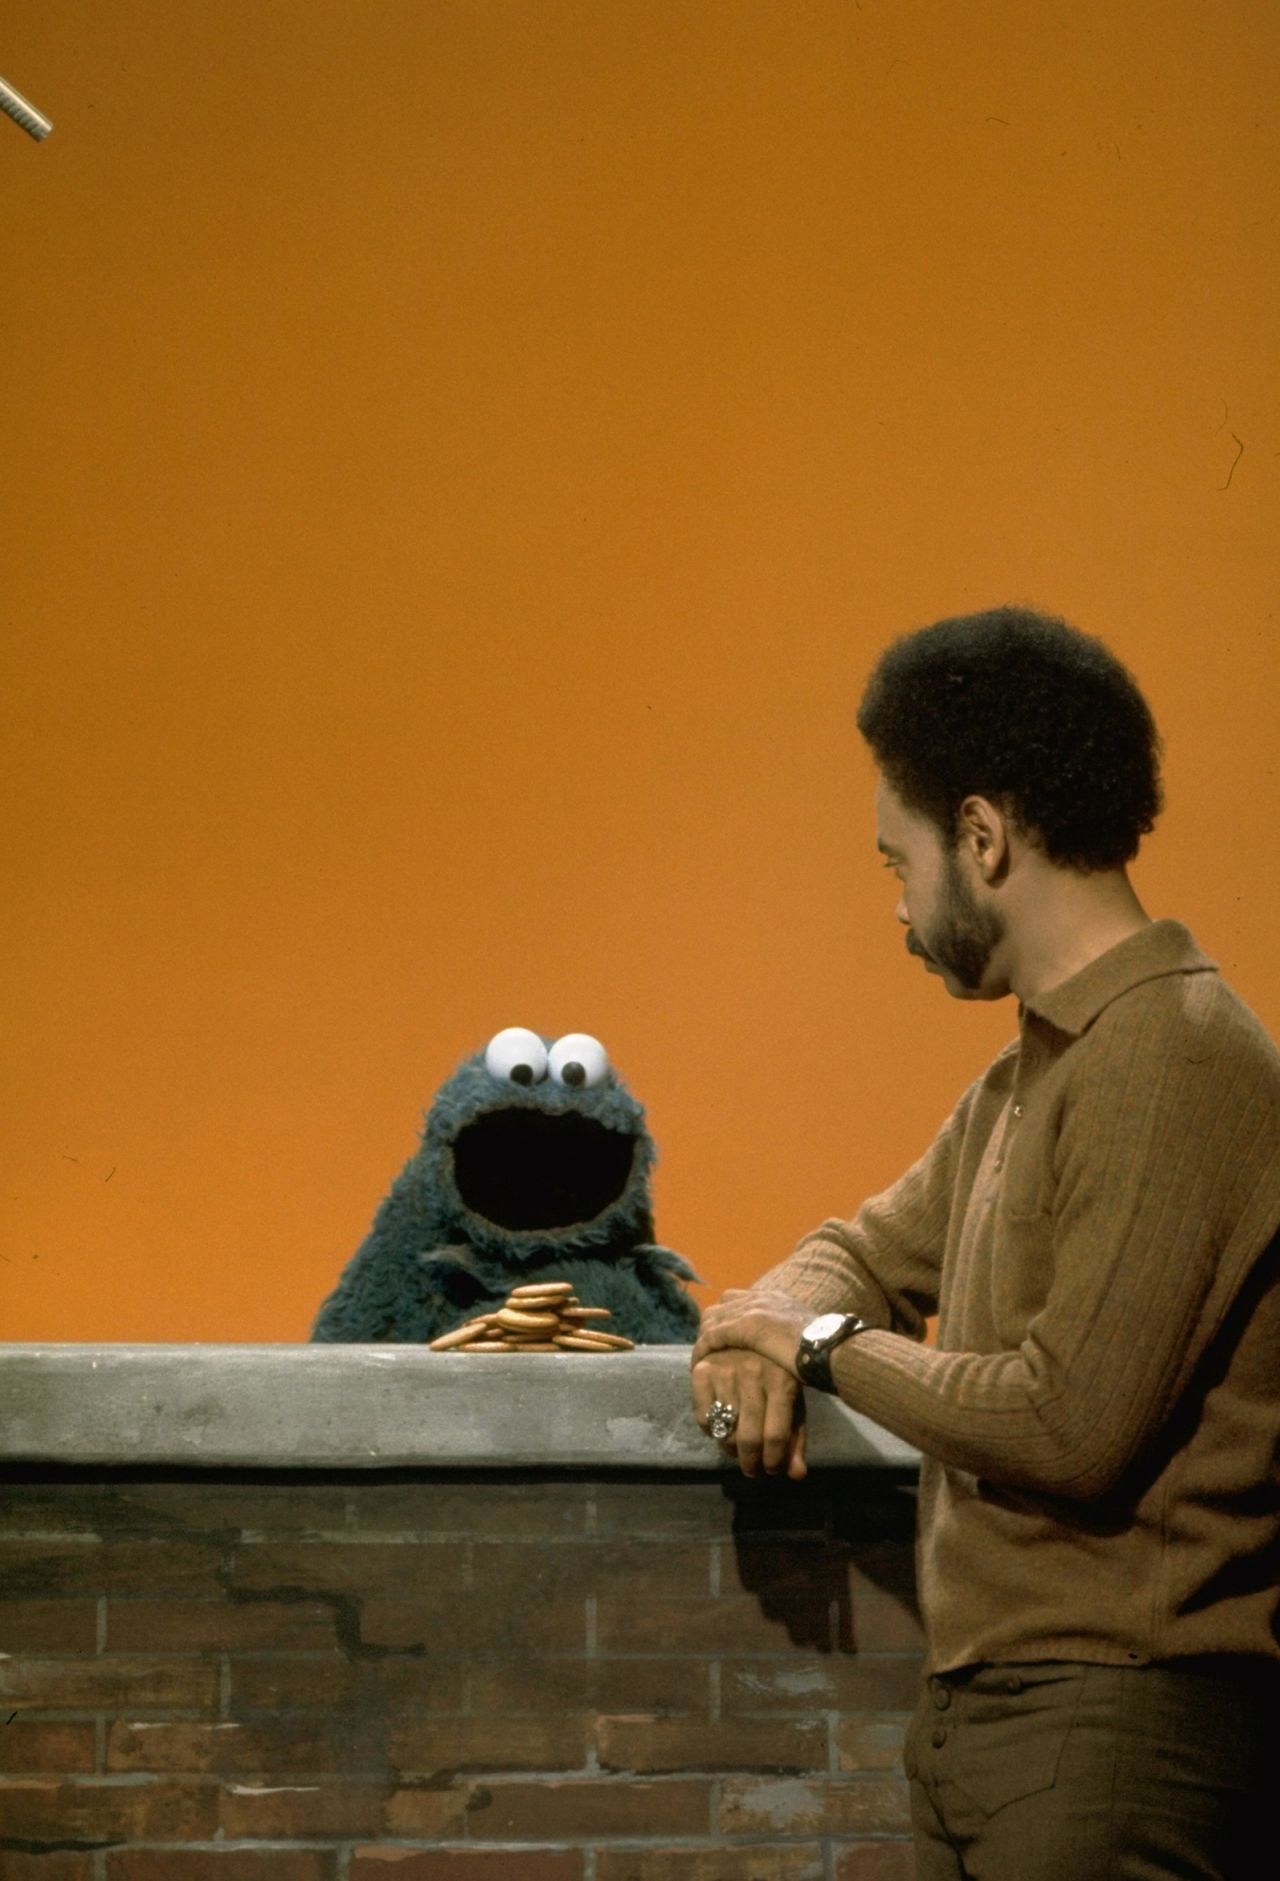 Actor Matt Robinson, the first actor to play Gordon on the show, chats with Cookie Monster.